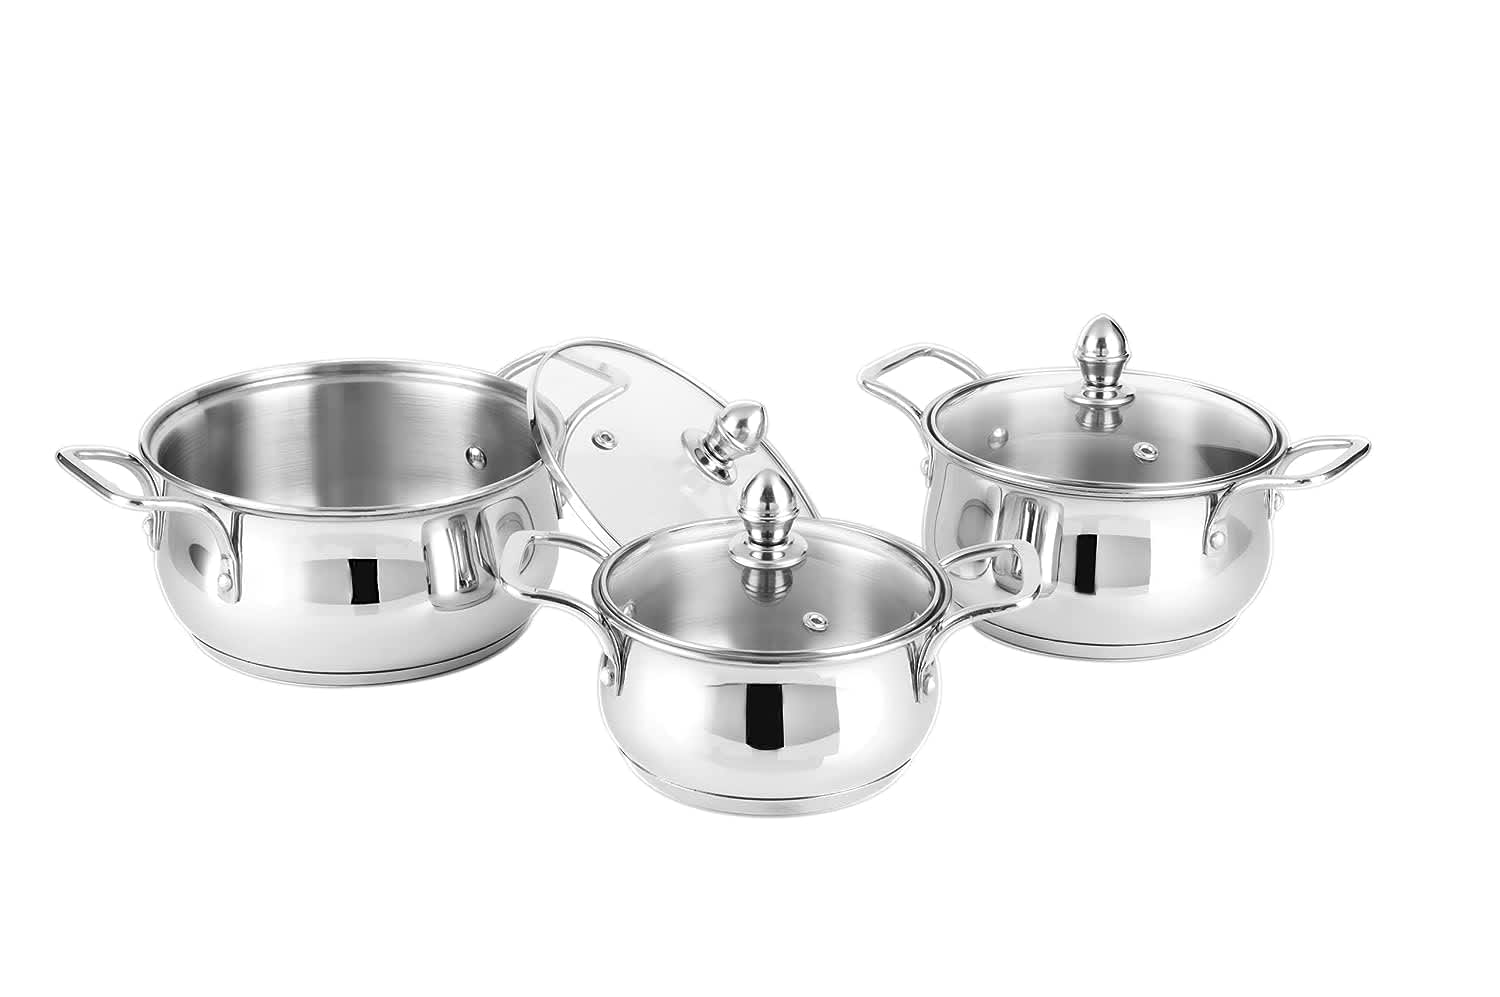 Steelcraft Premium Stainless Steel Induction Bottom AlmoraCookware Family Combo Best for Cook and Serve Set of 3 pc Casserole 14cm 850ml 16cm 1300ml18cm 1800ml with Glass Lids Silver